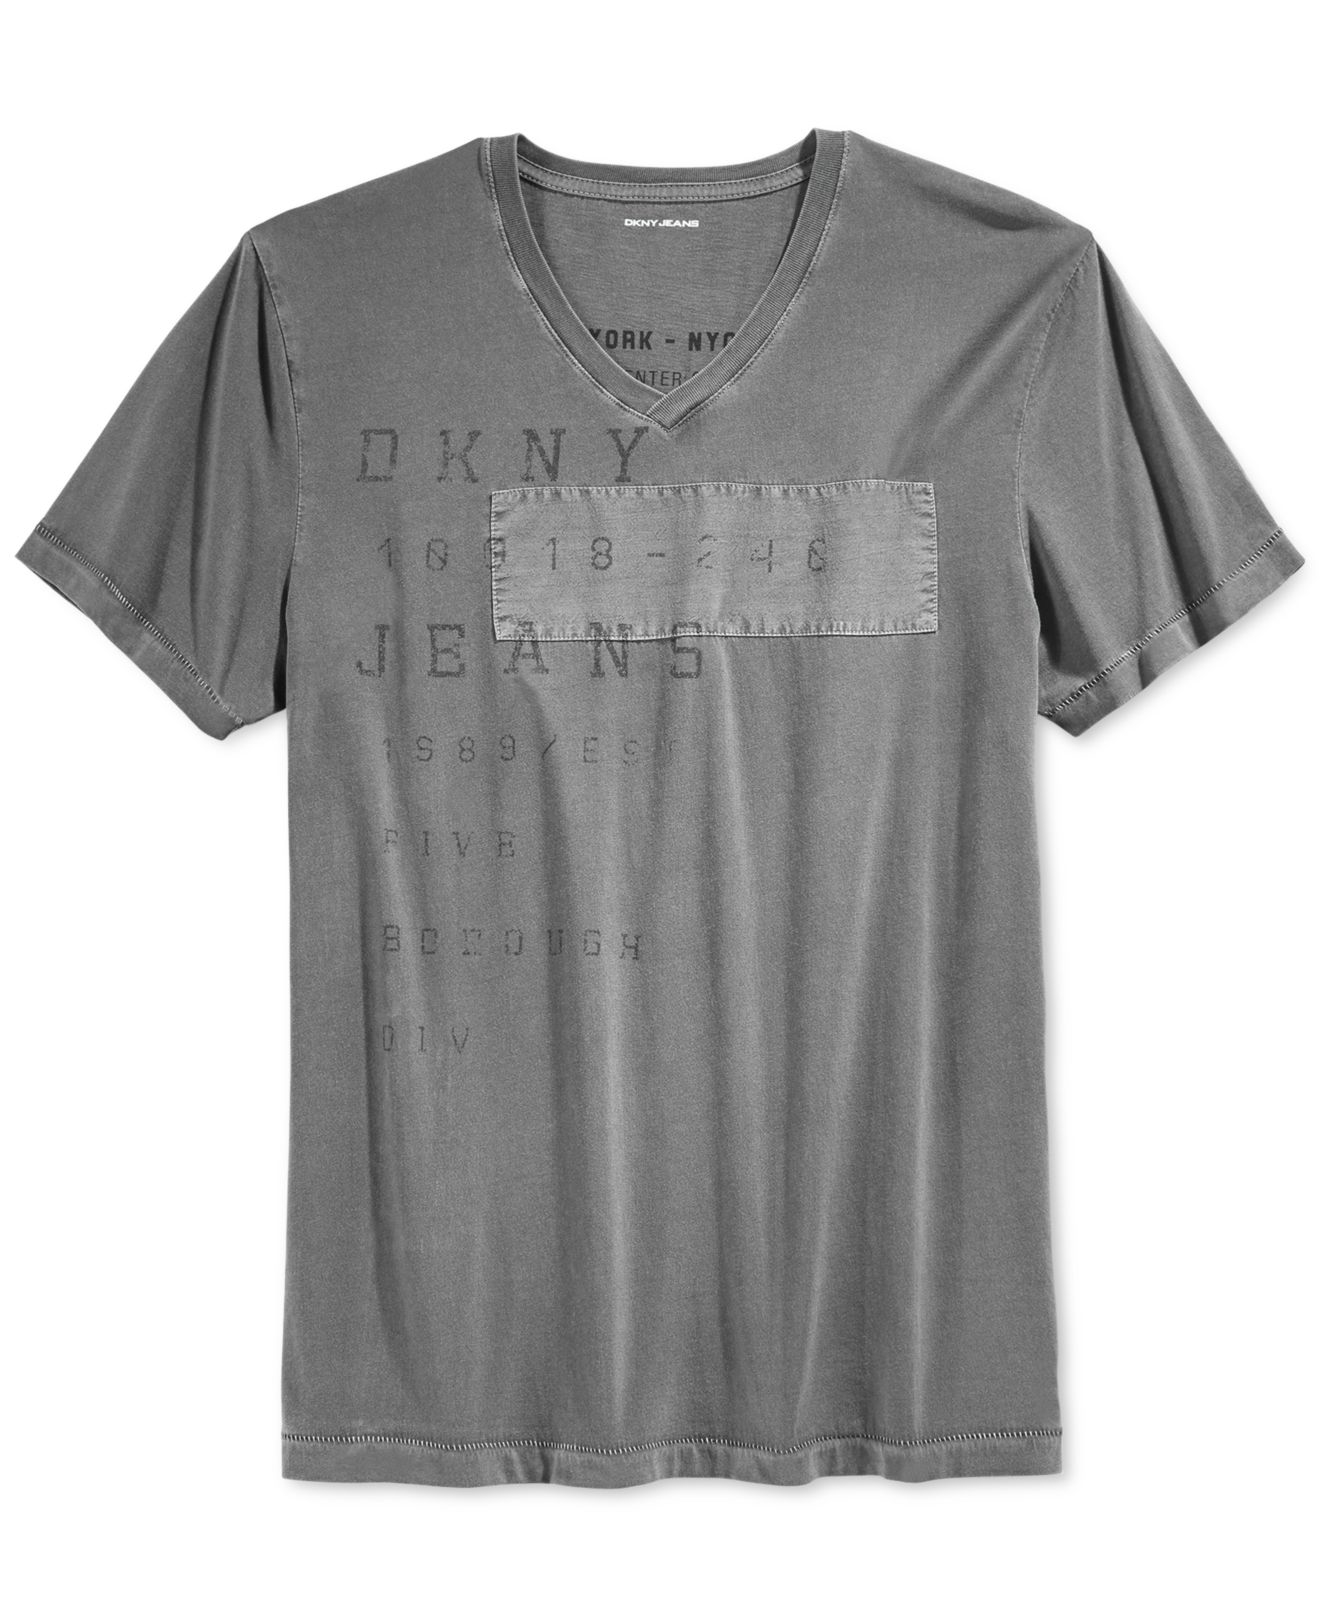 Lyst - Dkny Logo Graphic T-shirt in Gray for Men